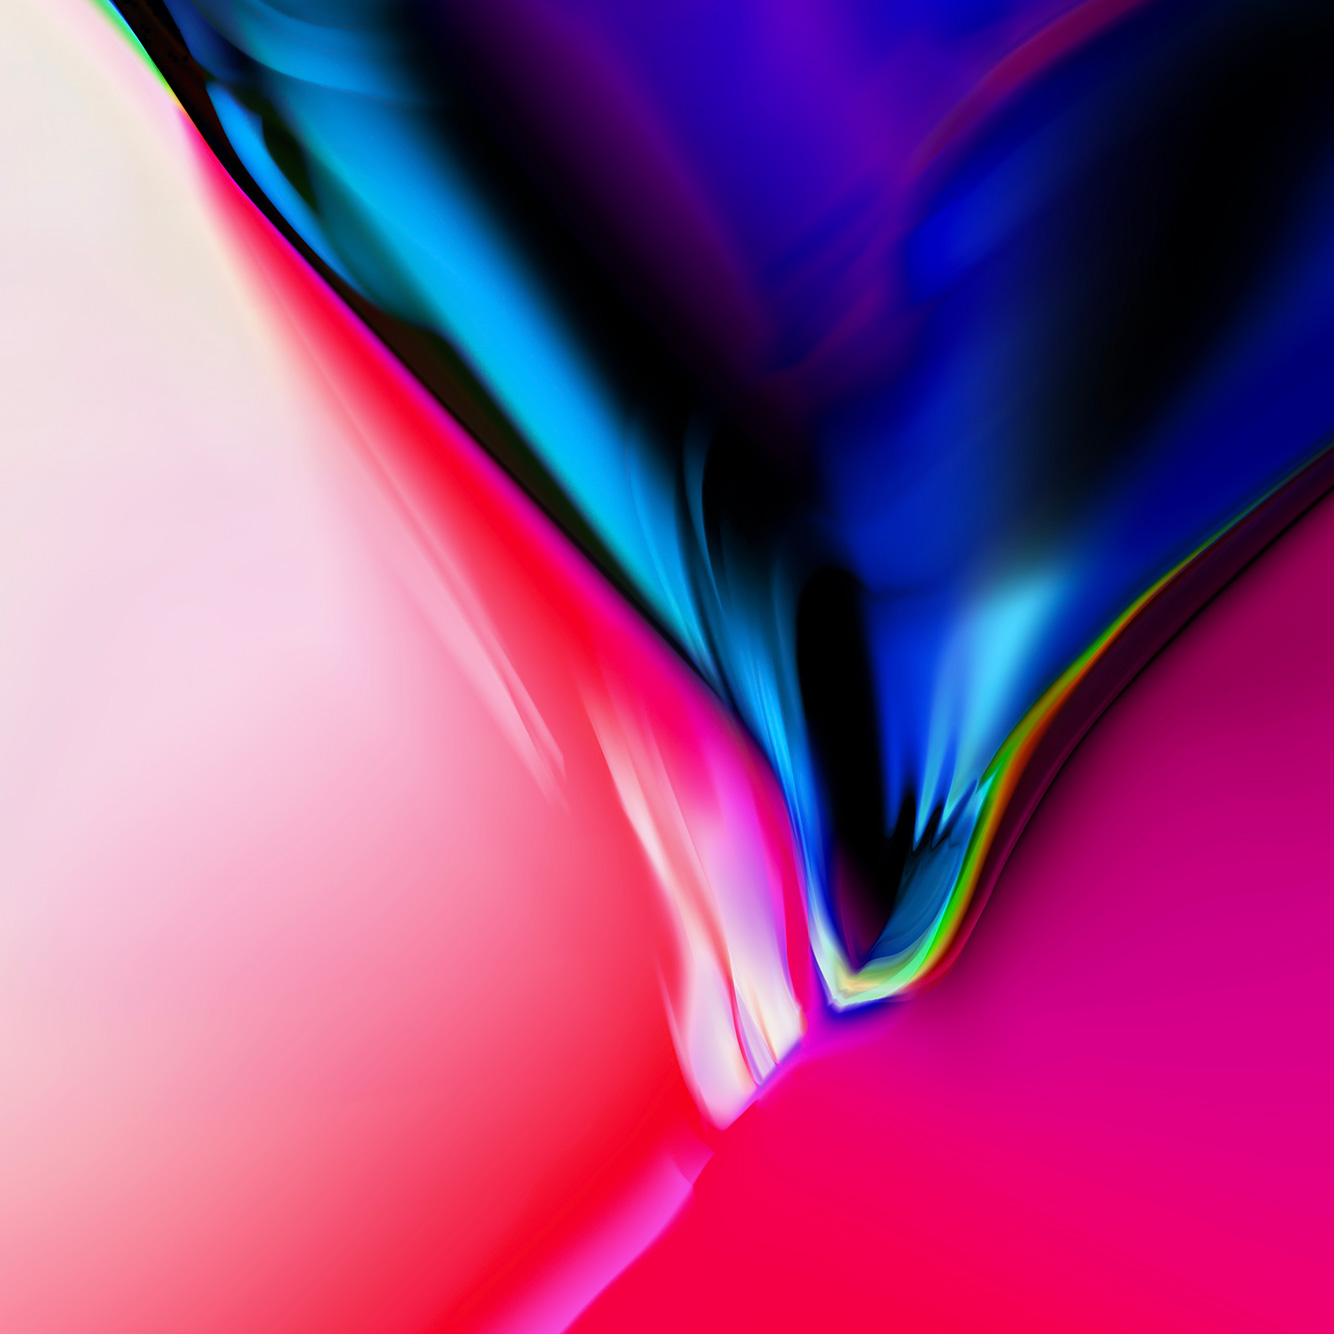 Full Width Official Apple iPhone Wallpaper Background